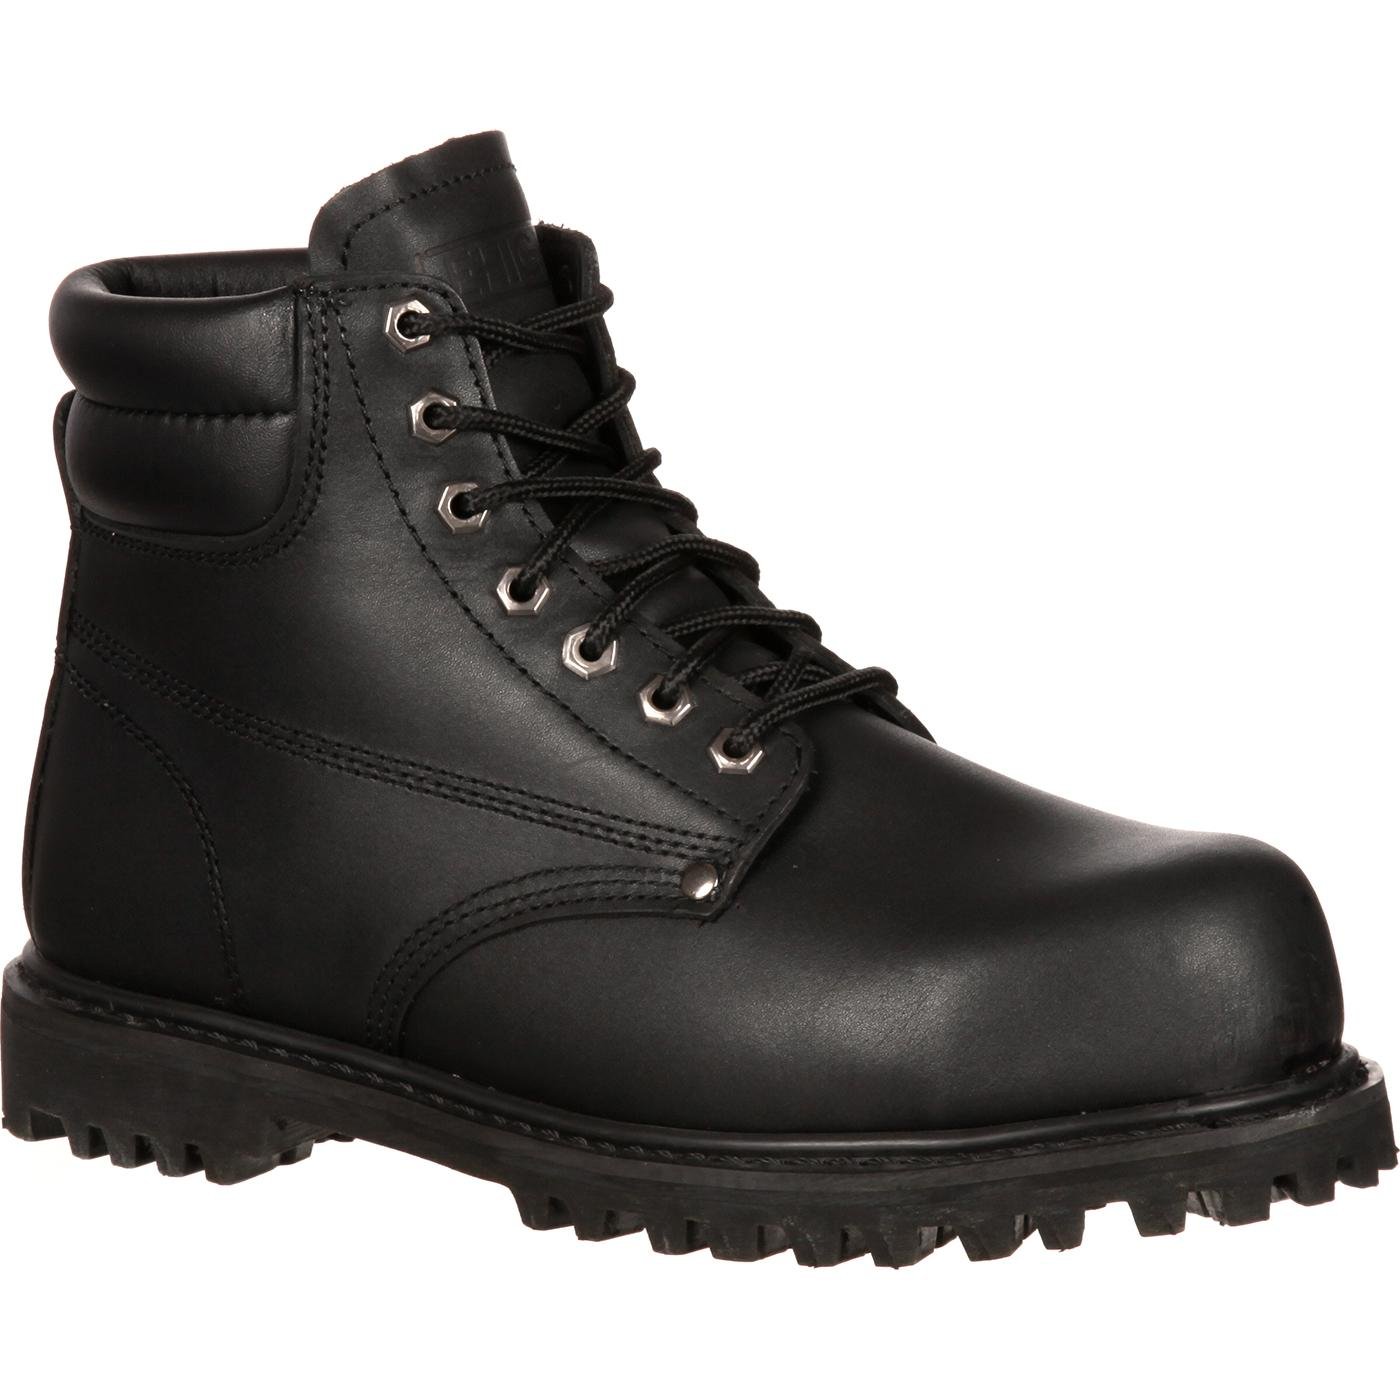 Black Work Boots For Women